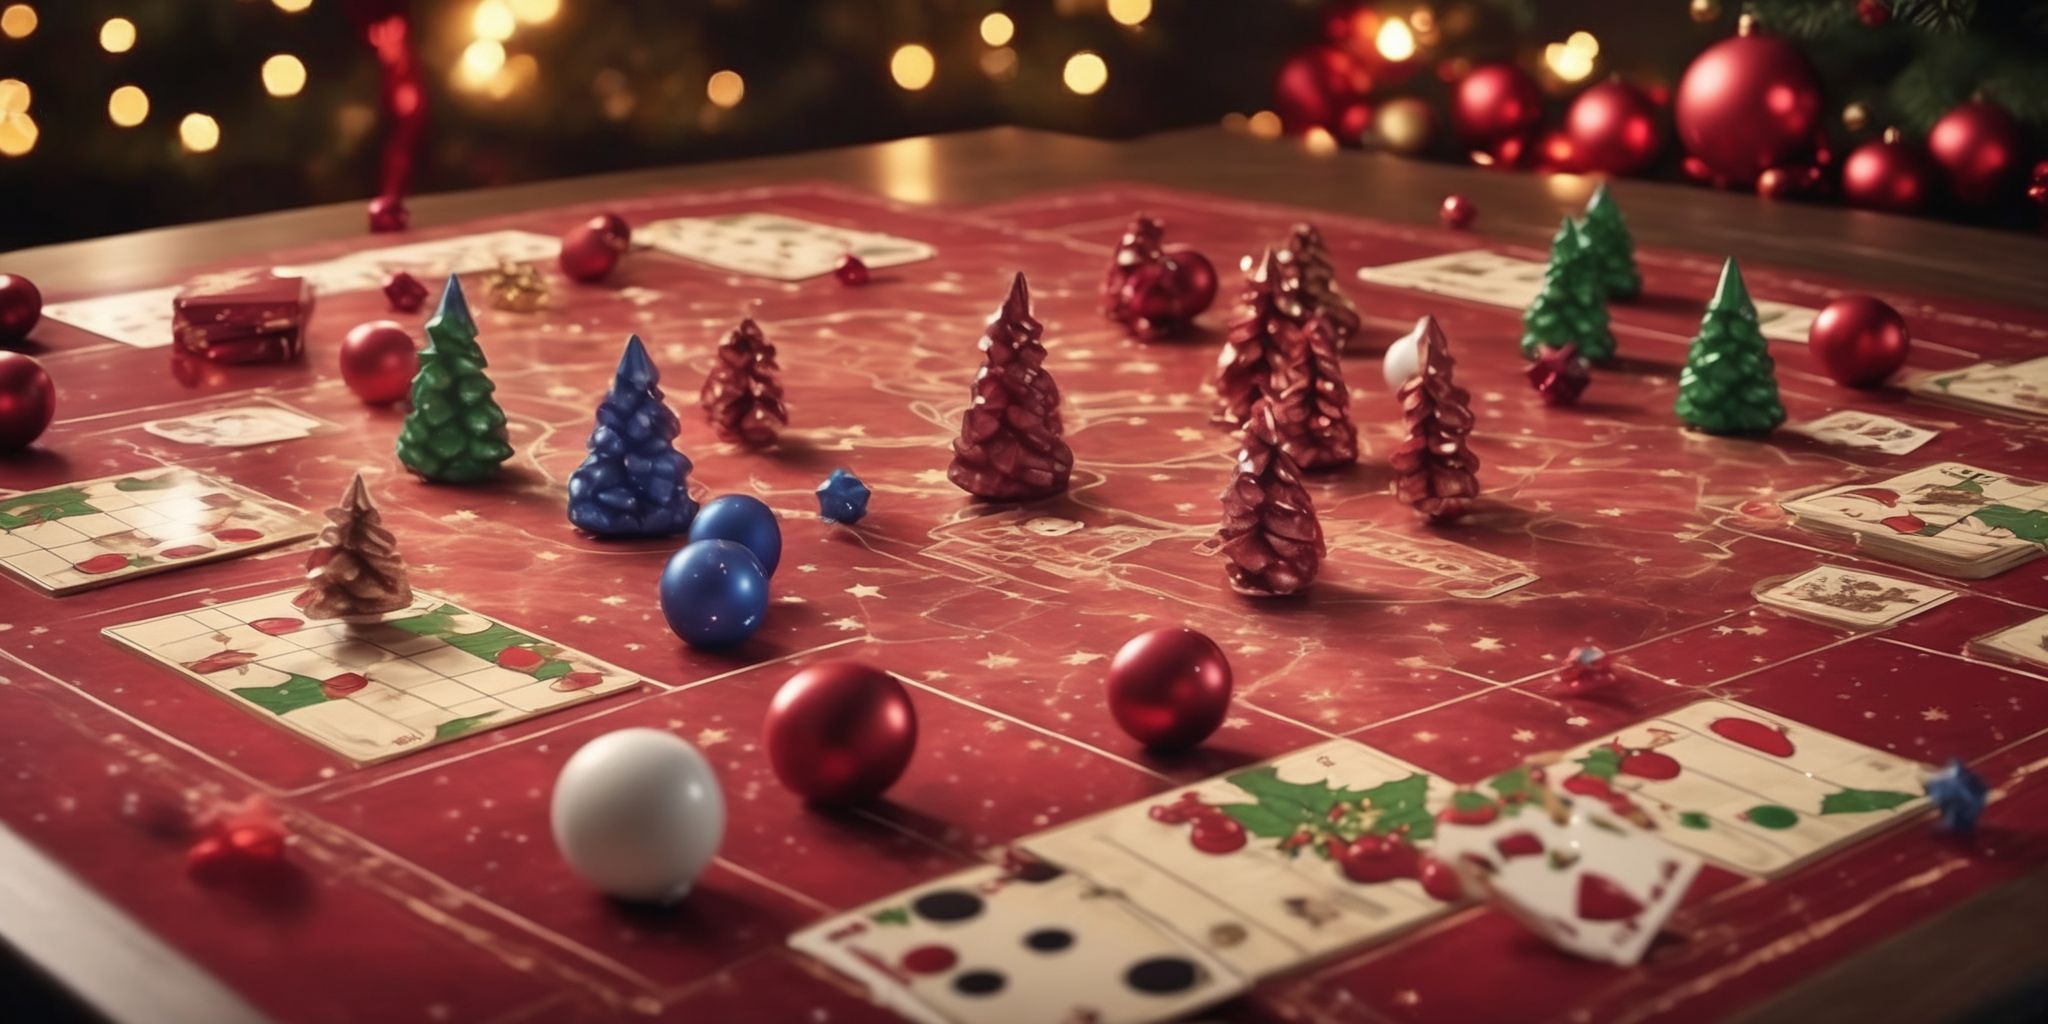 Board games in realistic Christmas style